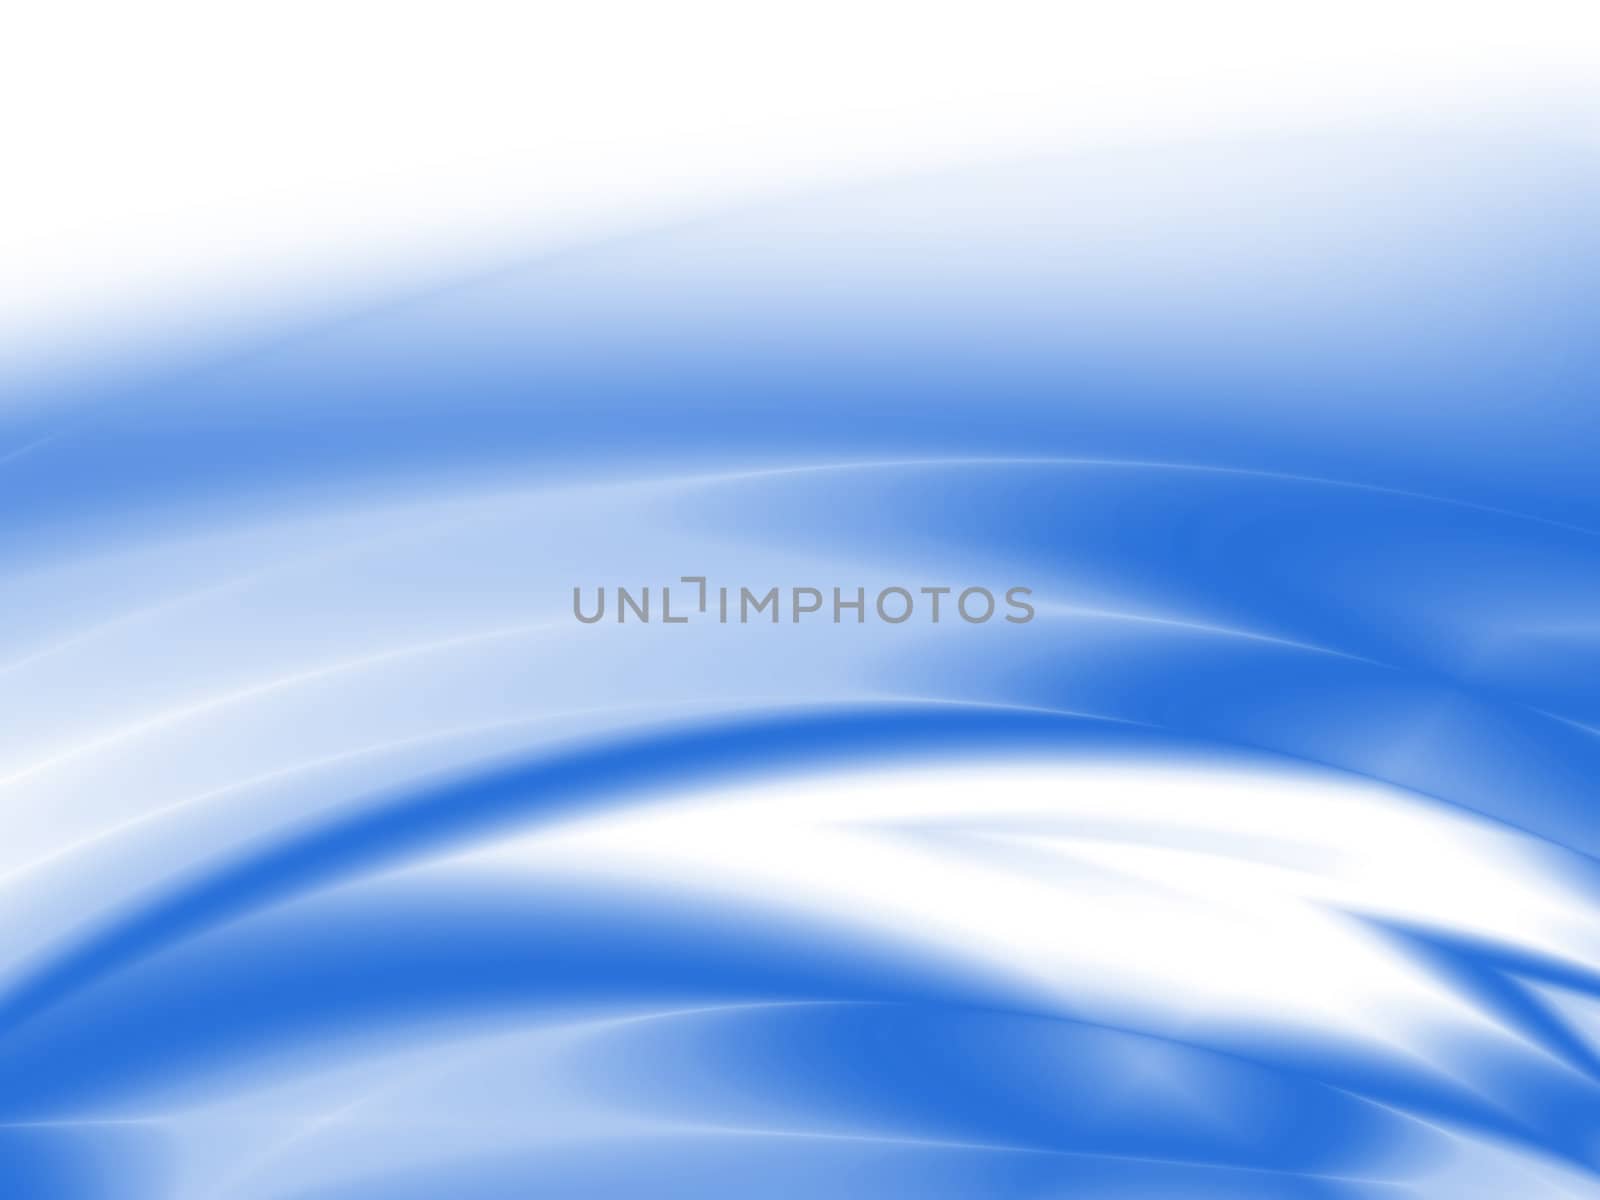 abstract waves, overflowing the tints of blue color on a white background